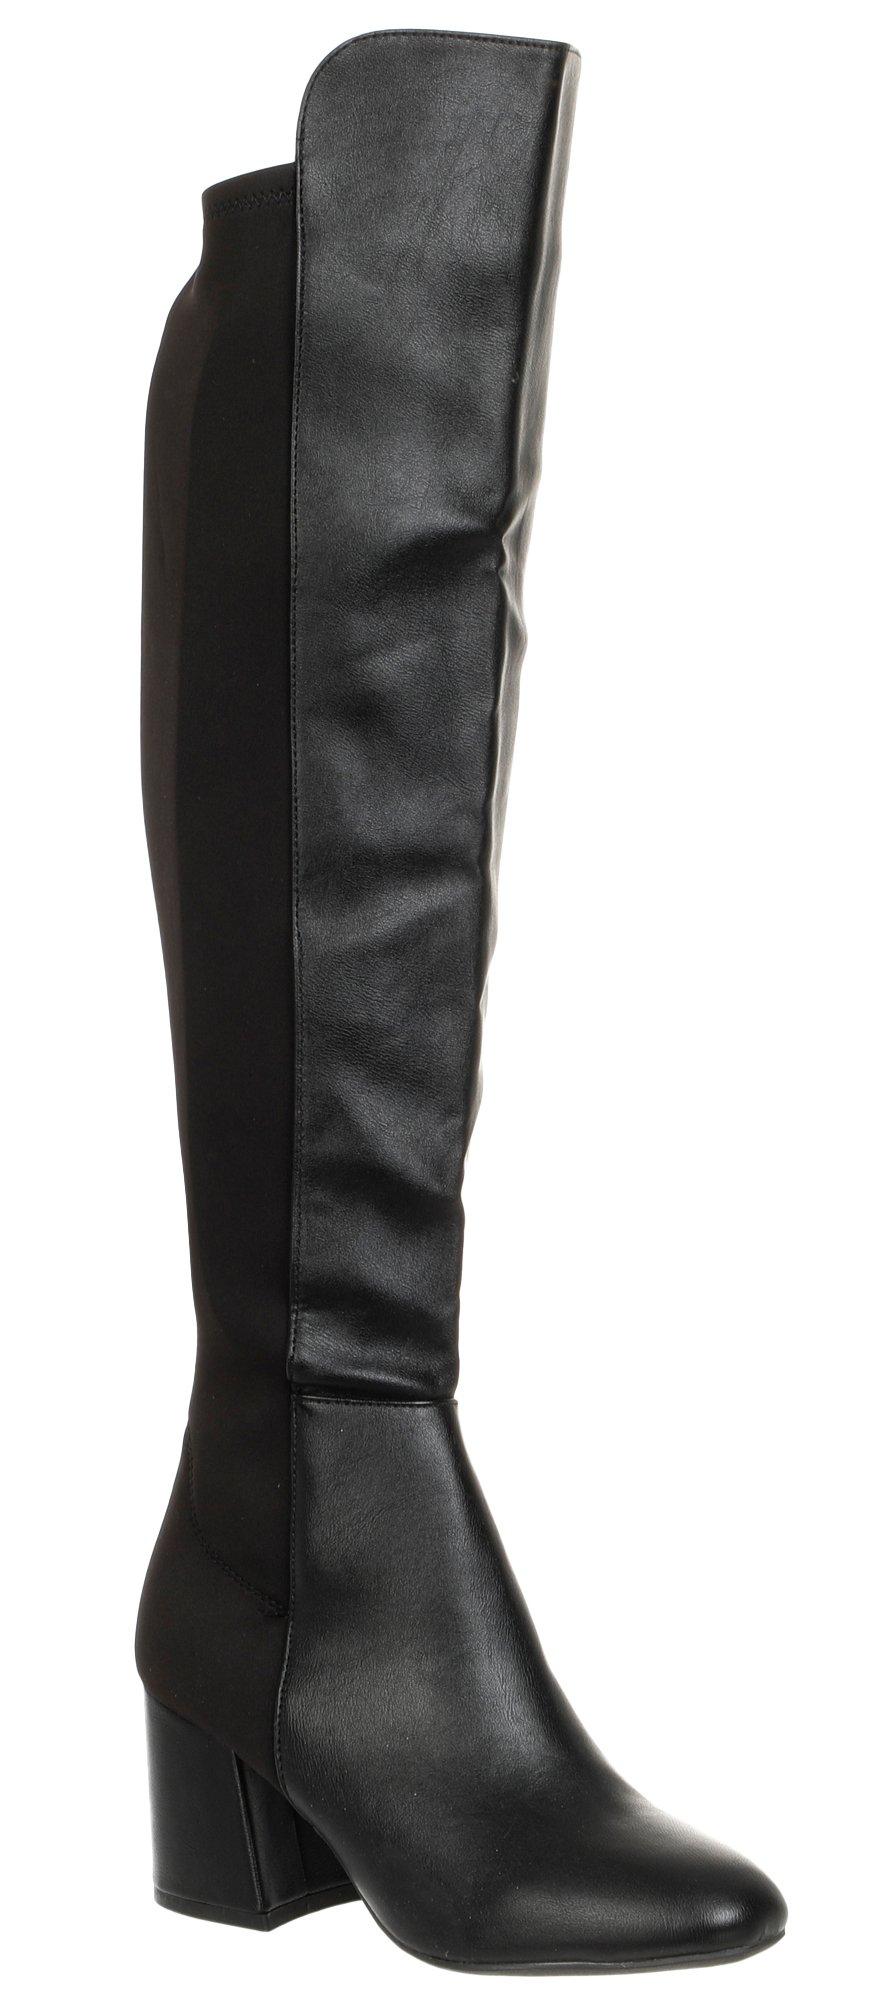 Women's Faux Leather Thigh High Boots